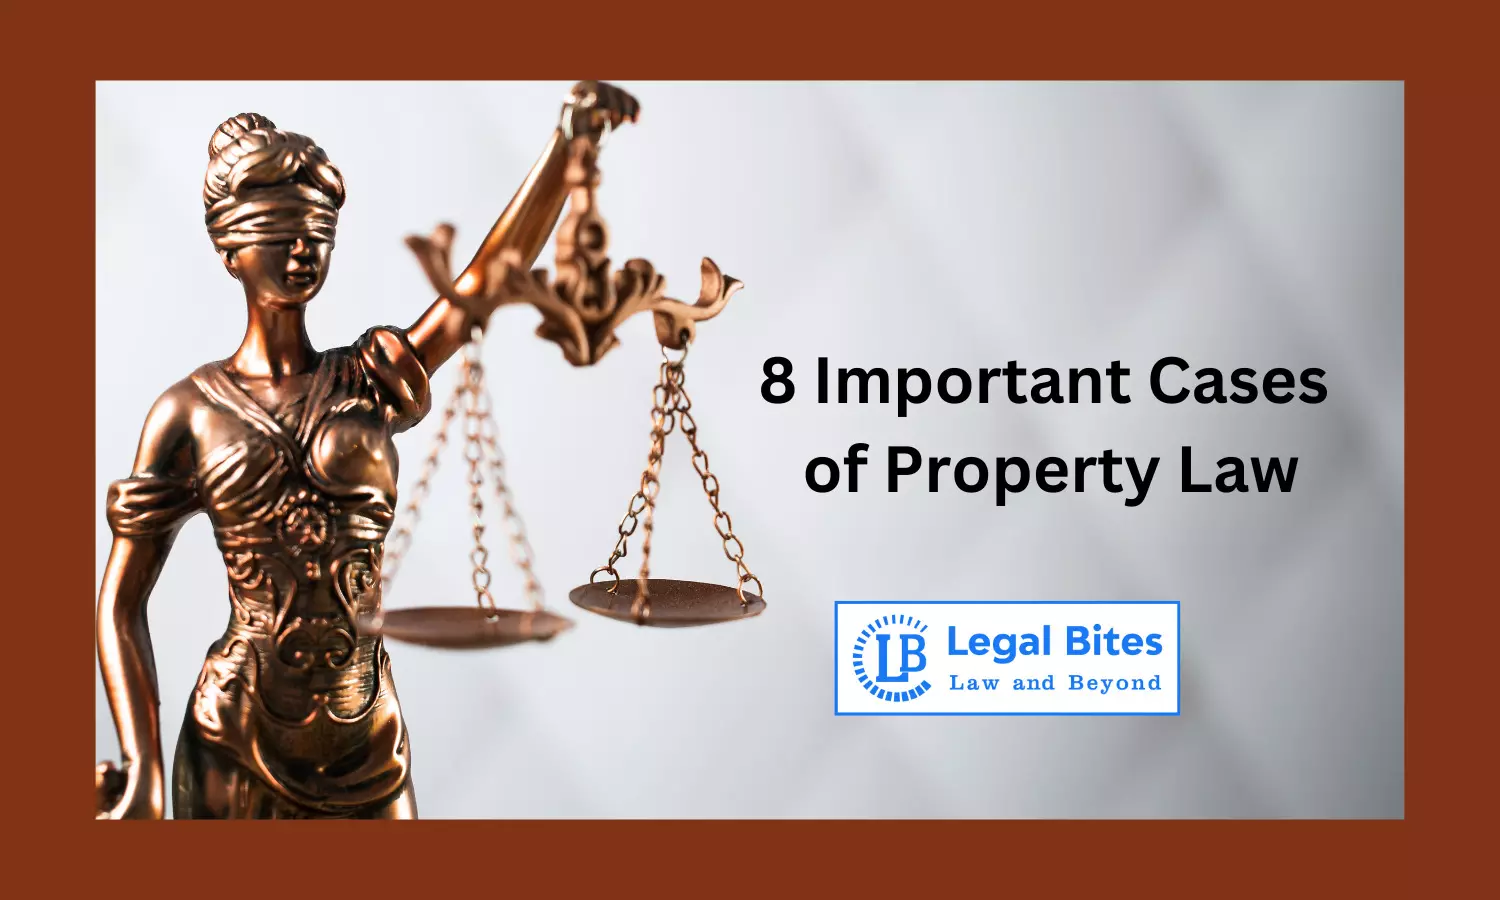 8 Important Cases of Property Law